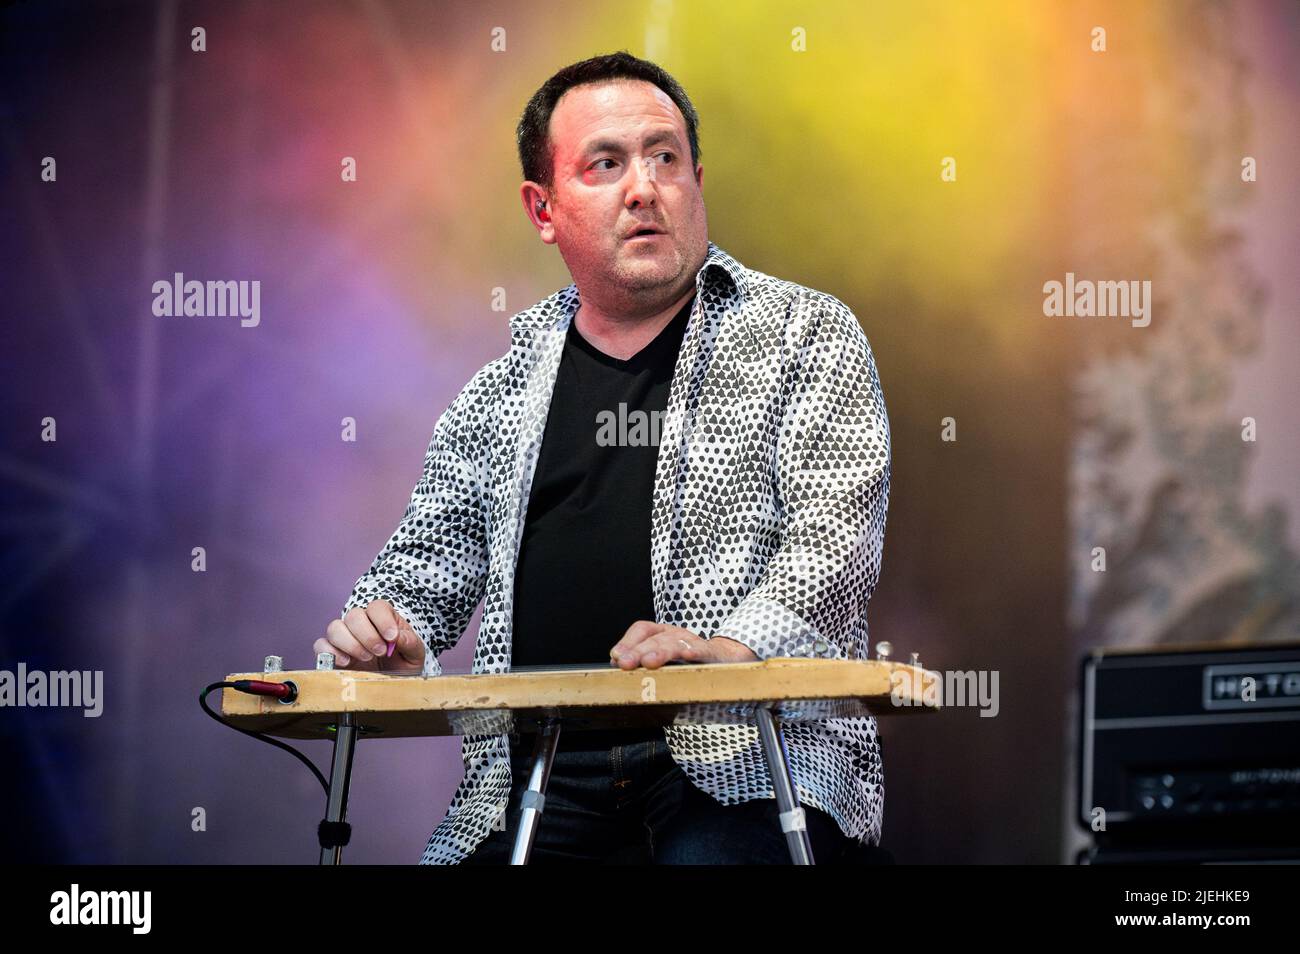 ITALY, STUPINIGI, JUNE 27TH 2022: Lee Harris, multi-instrumentalist of the English rock band “Nick Mason's Saucerful of Secrets” performing live on stage the early music of Pink Floyd Stock Photo